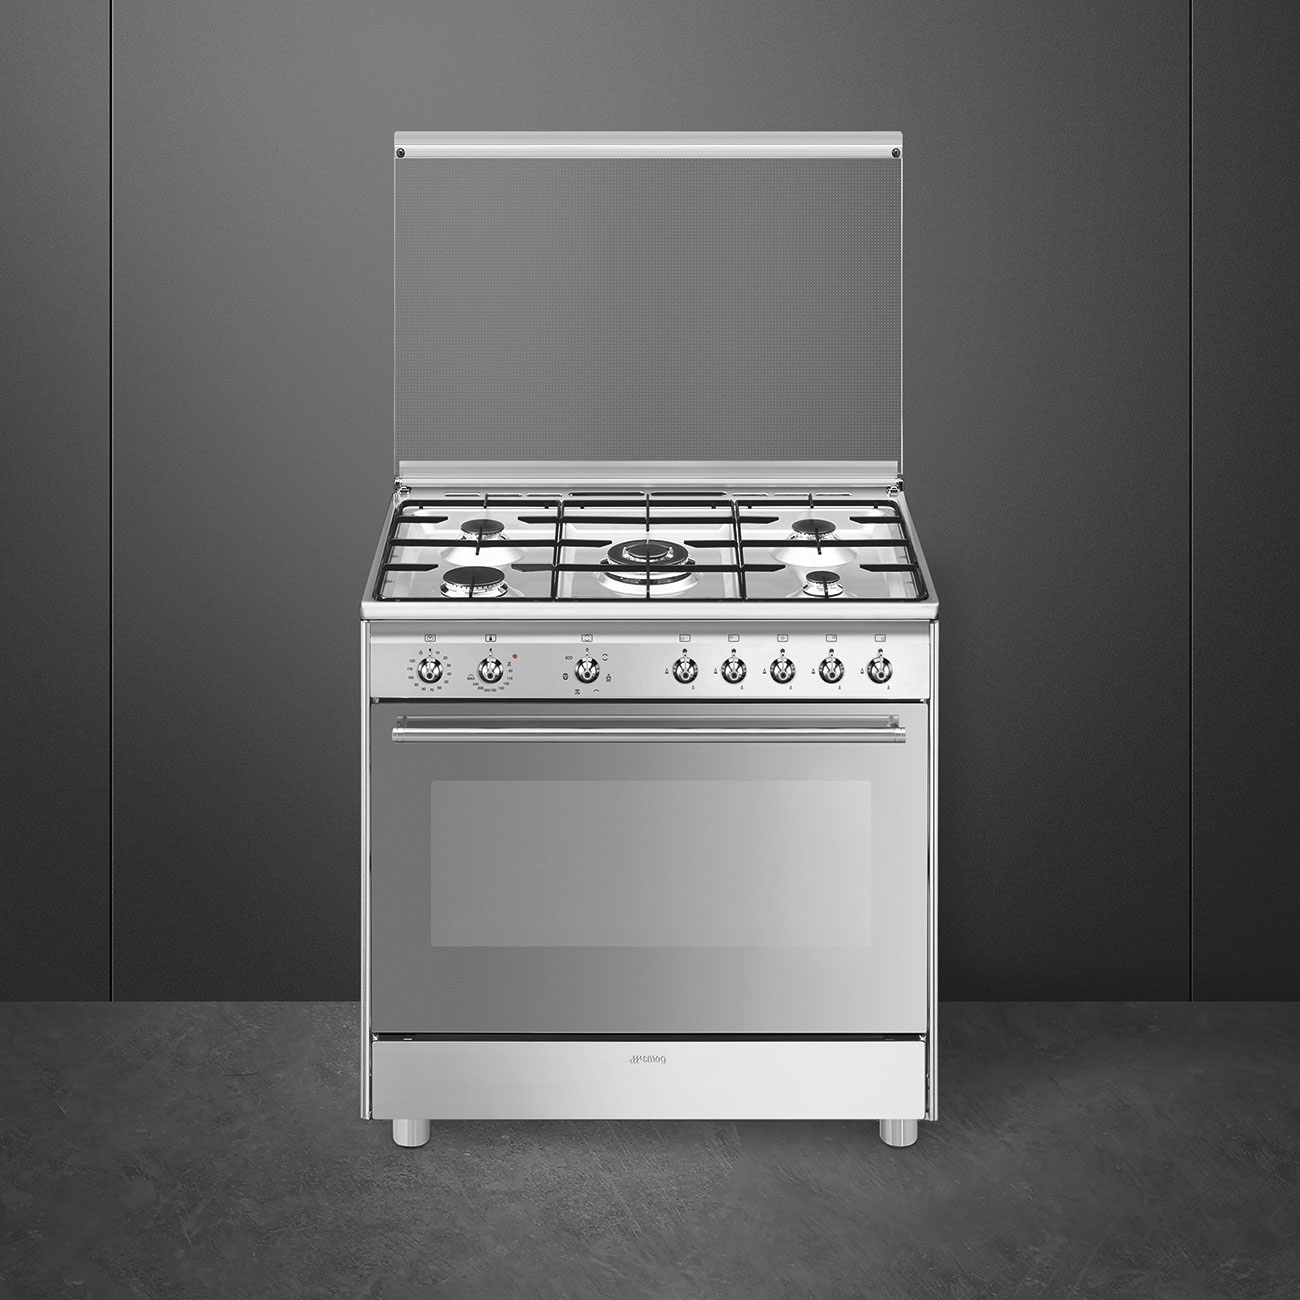 Smeg Stainless steel Cooker with Gas Hob_2